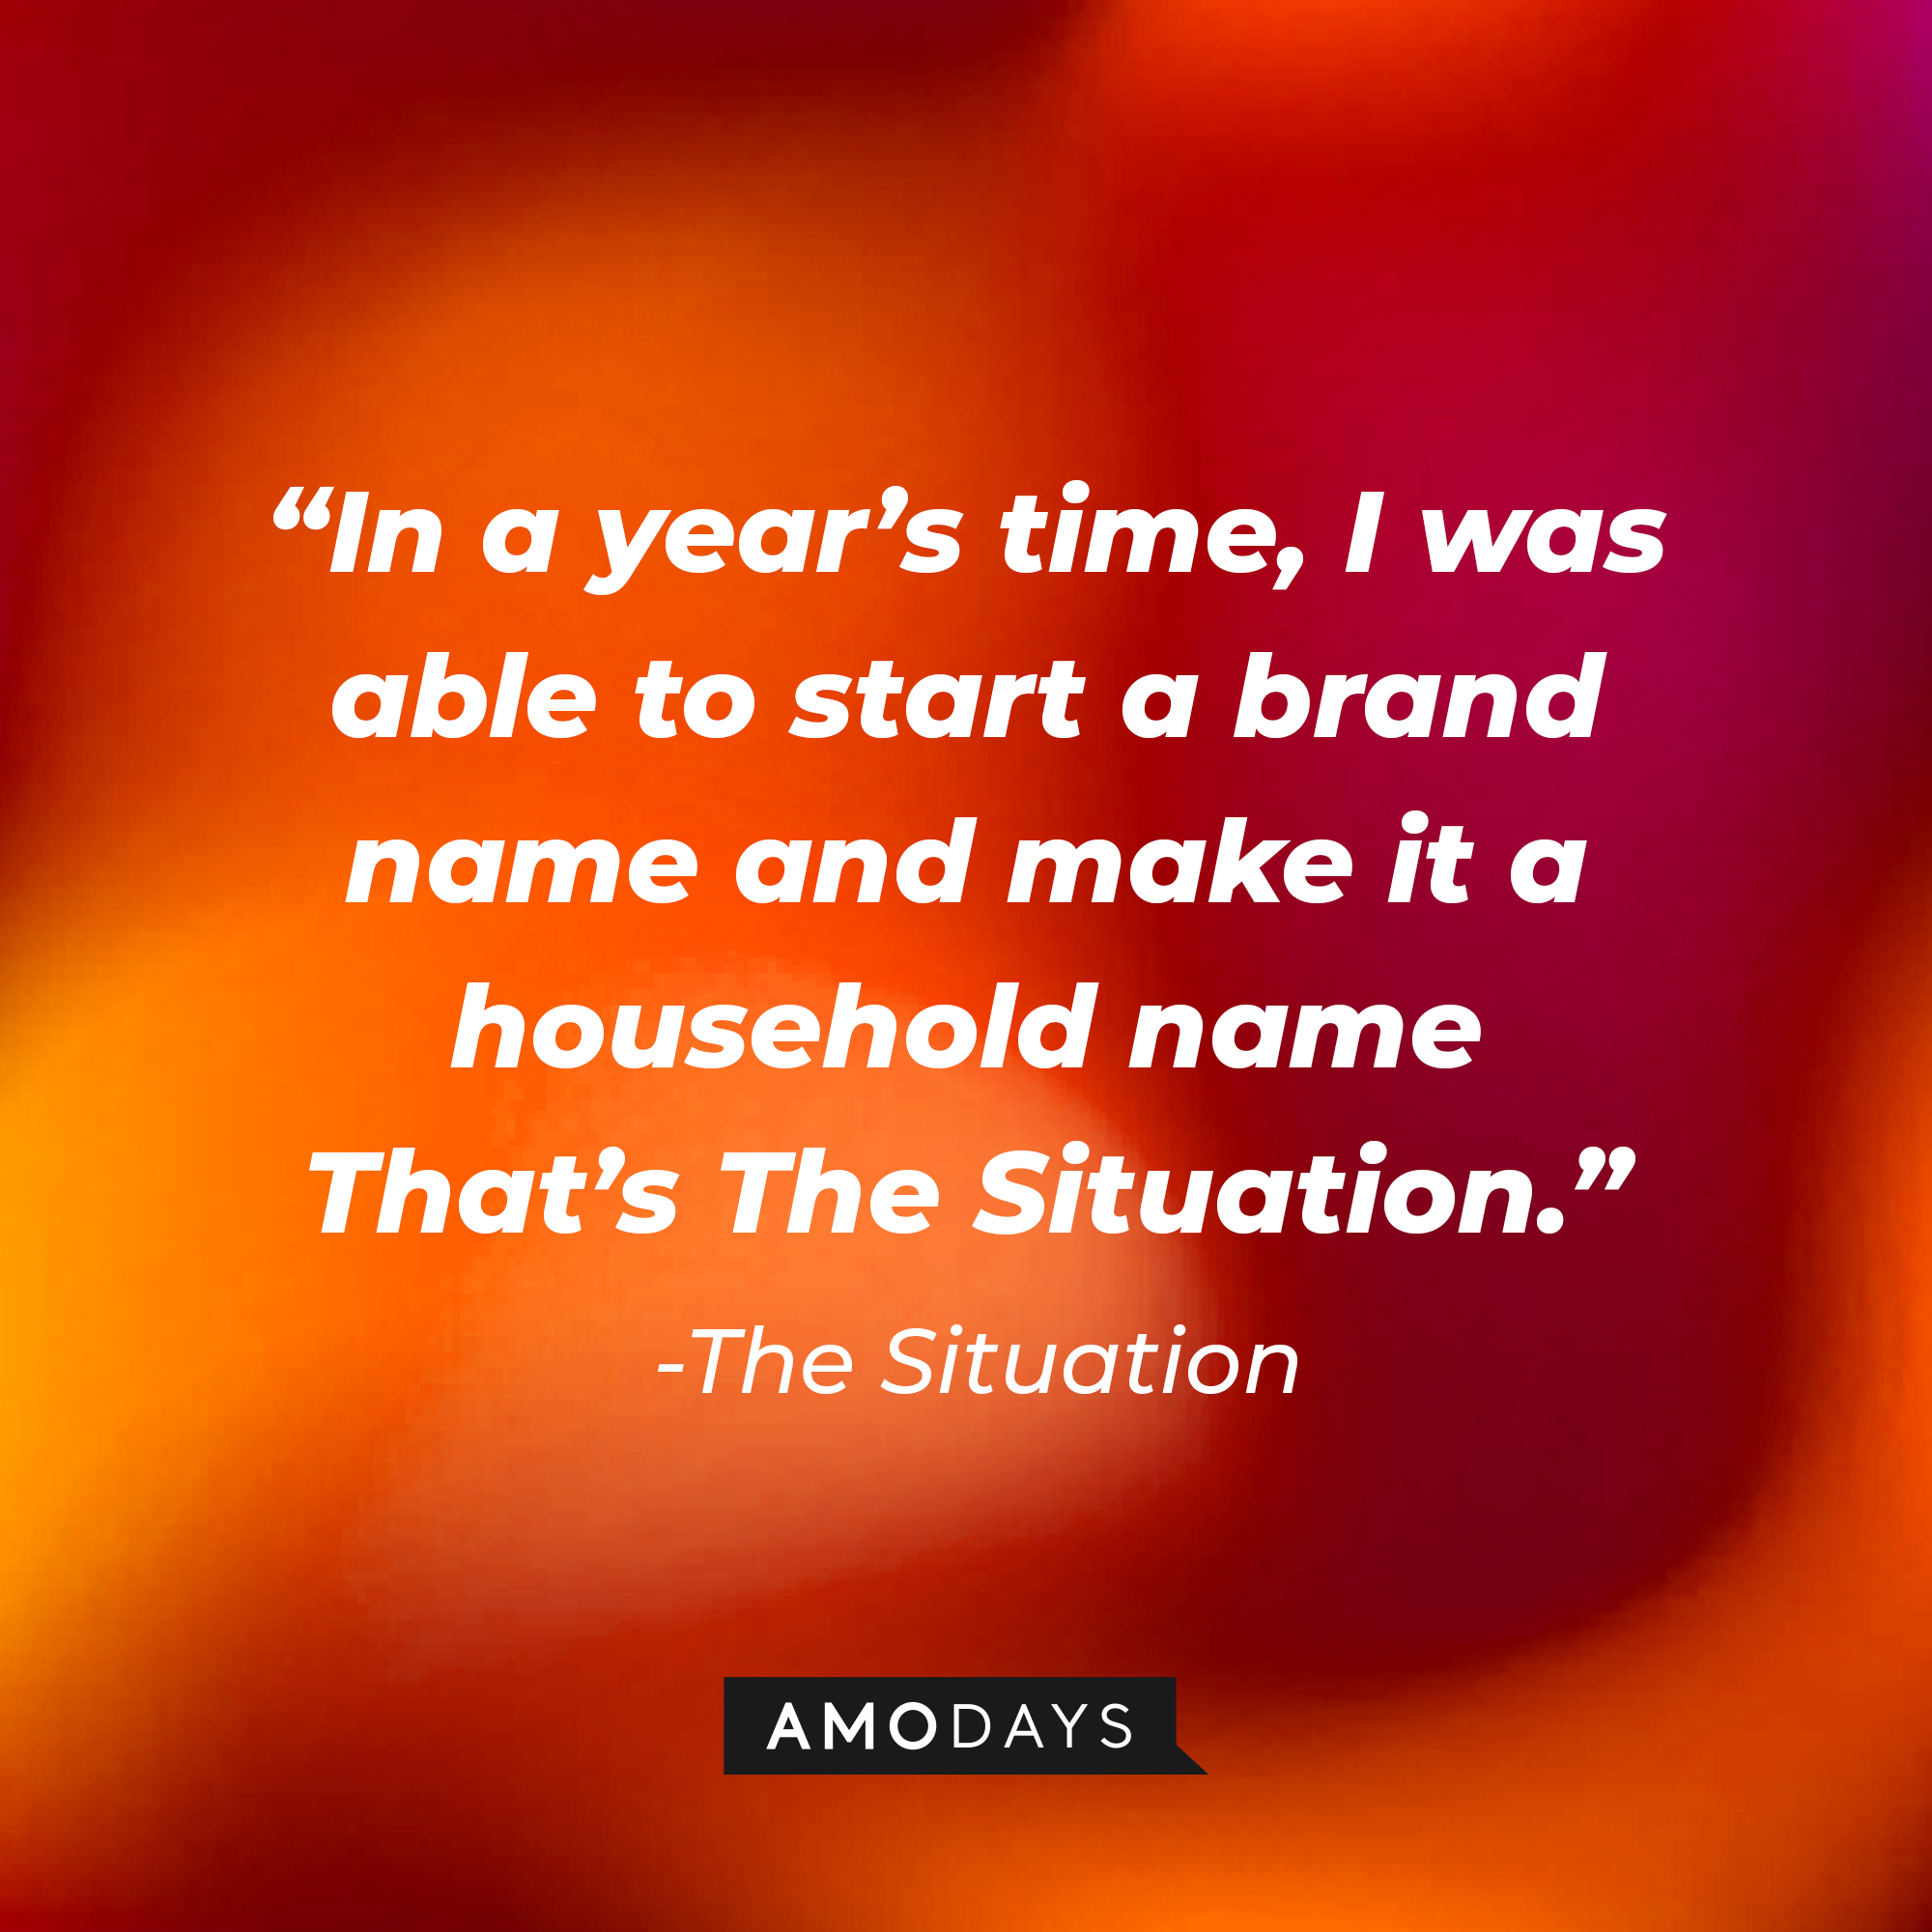 The Situation's quote: "In a year's time, I was able to start a brand name and make it a household name That's The Situation." | Source: youtube.com/jerseyshore